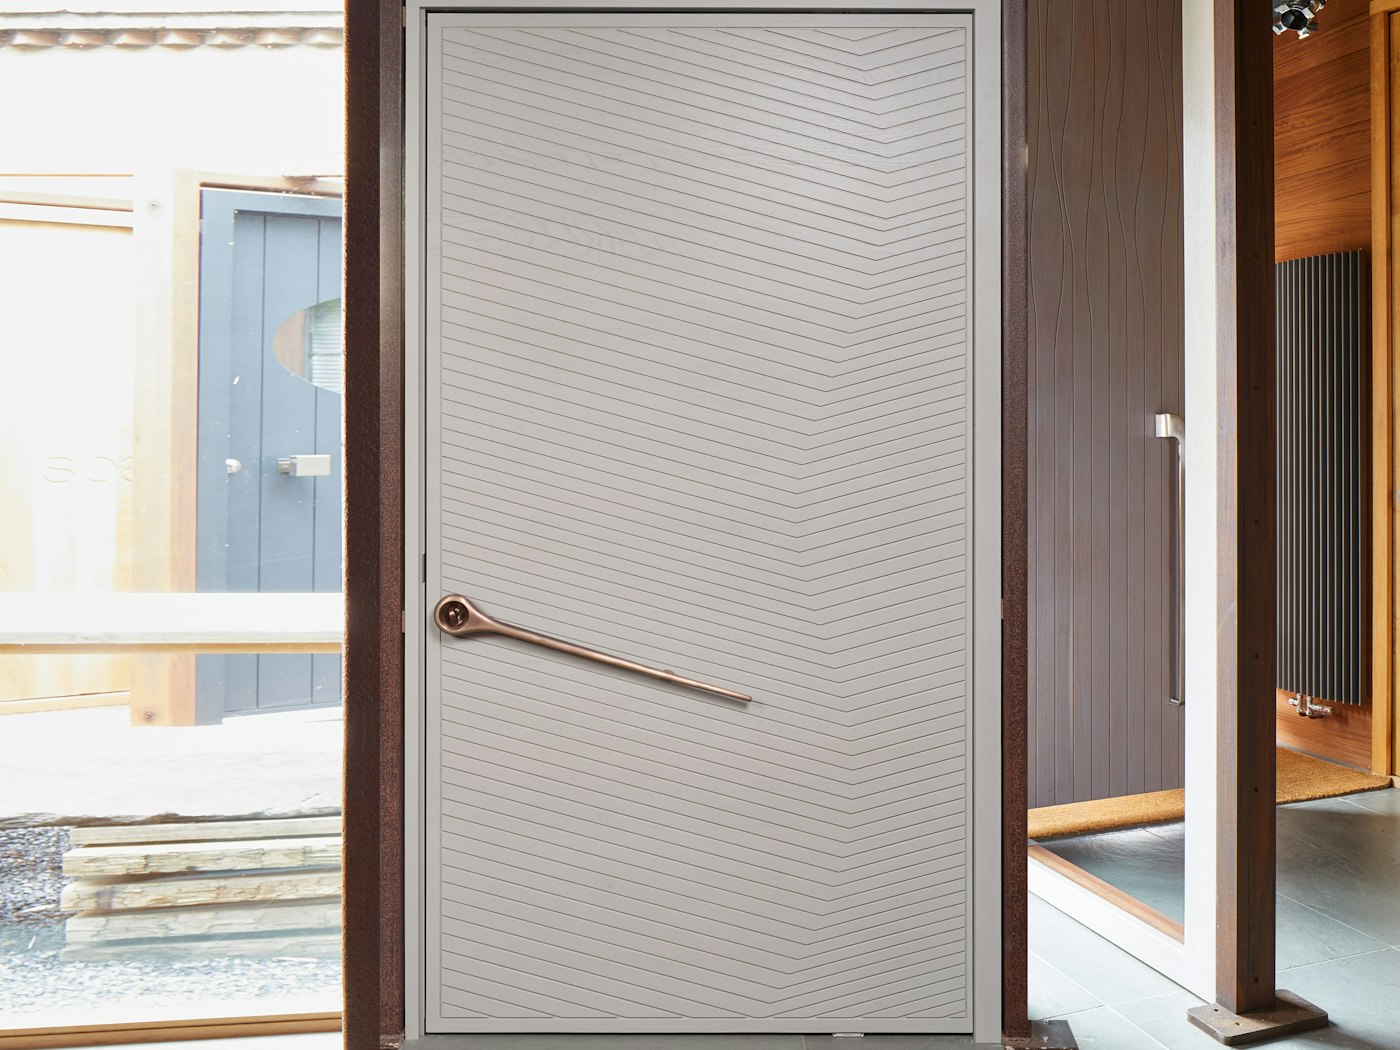 Our new Zebrano front door design features intricate detail & can be viewed in our Buckinghamshire showroom